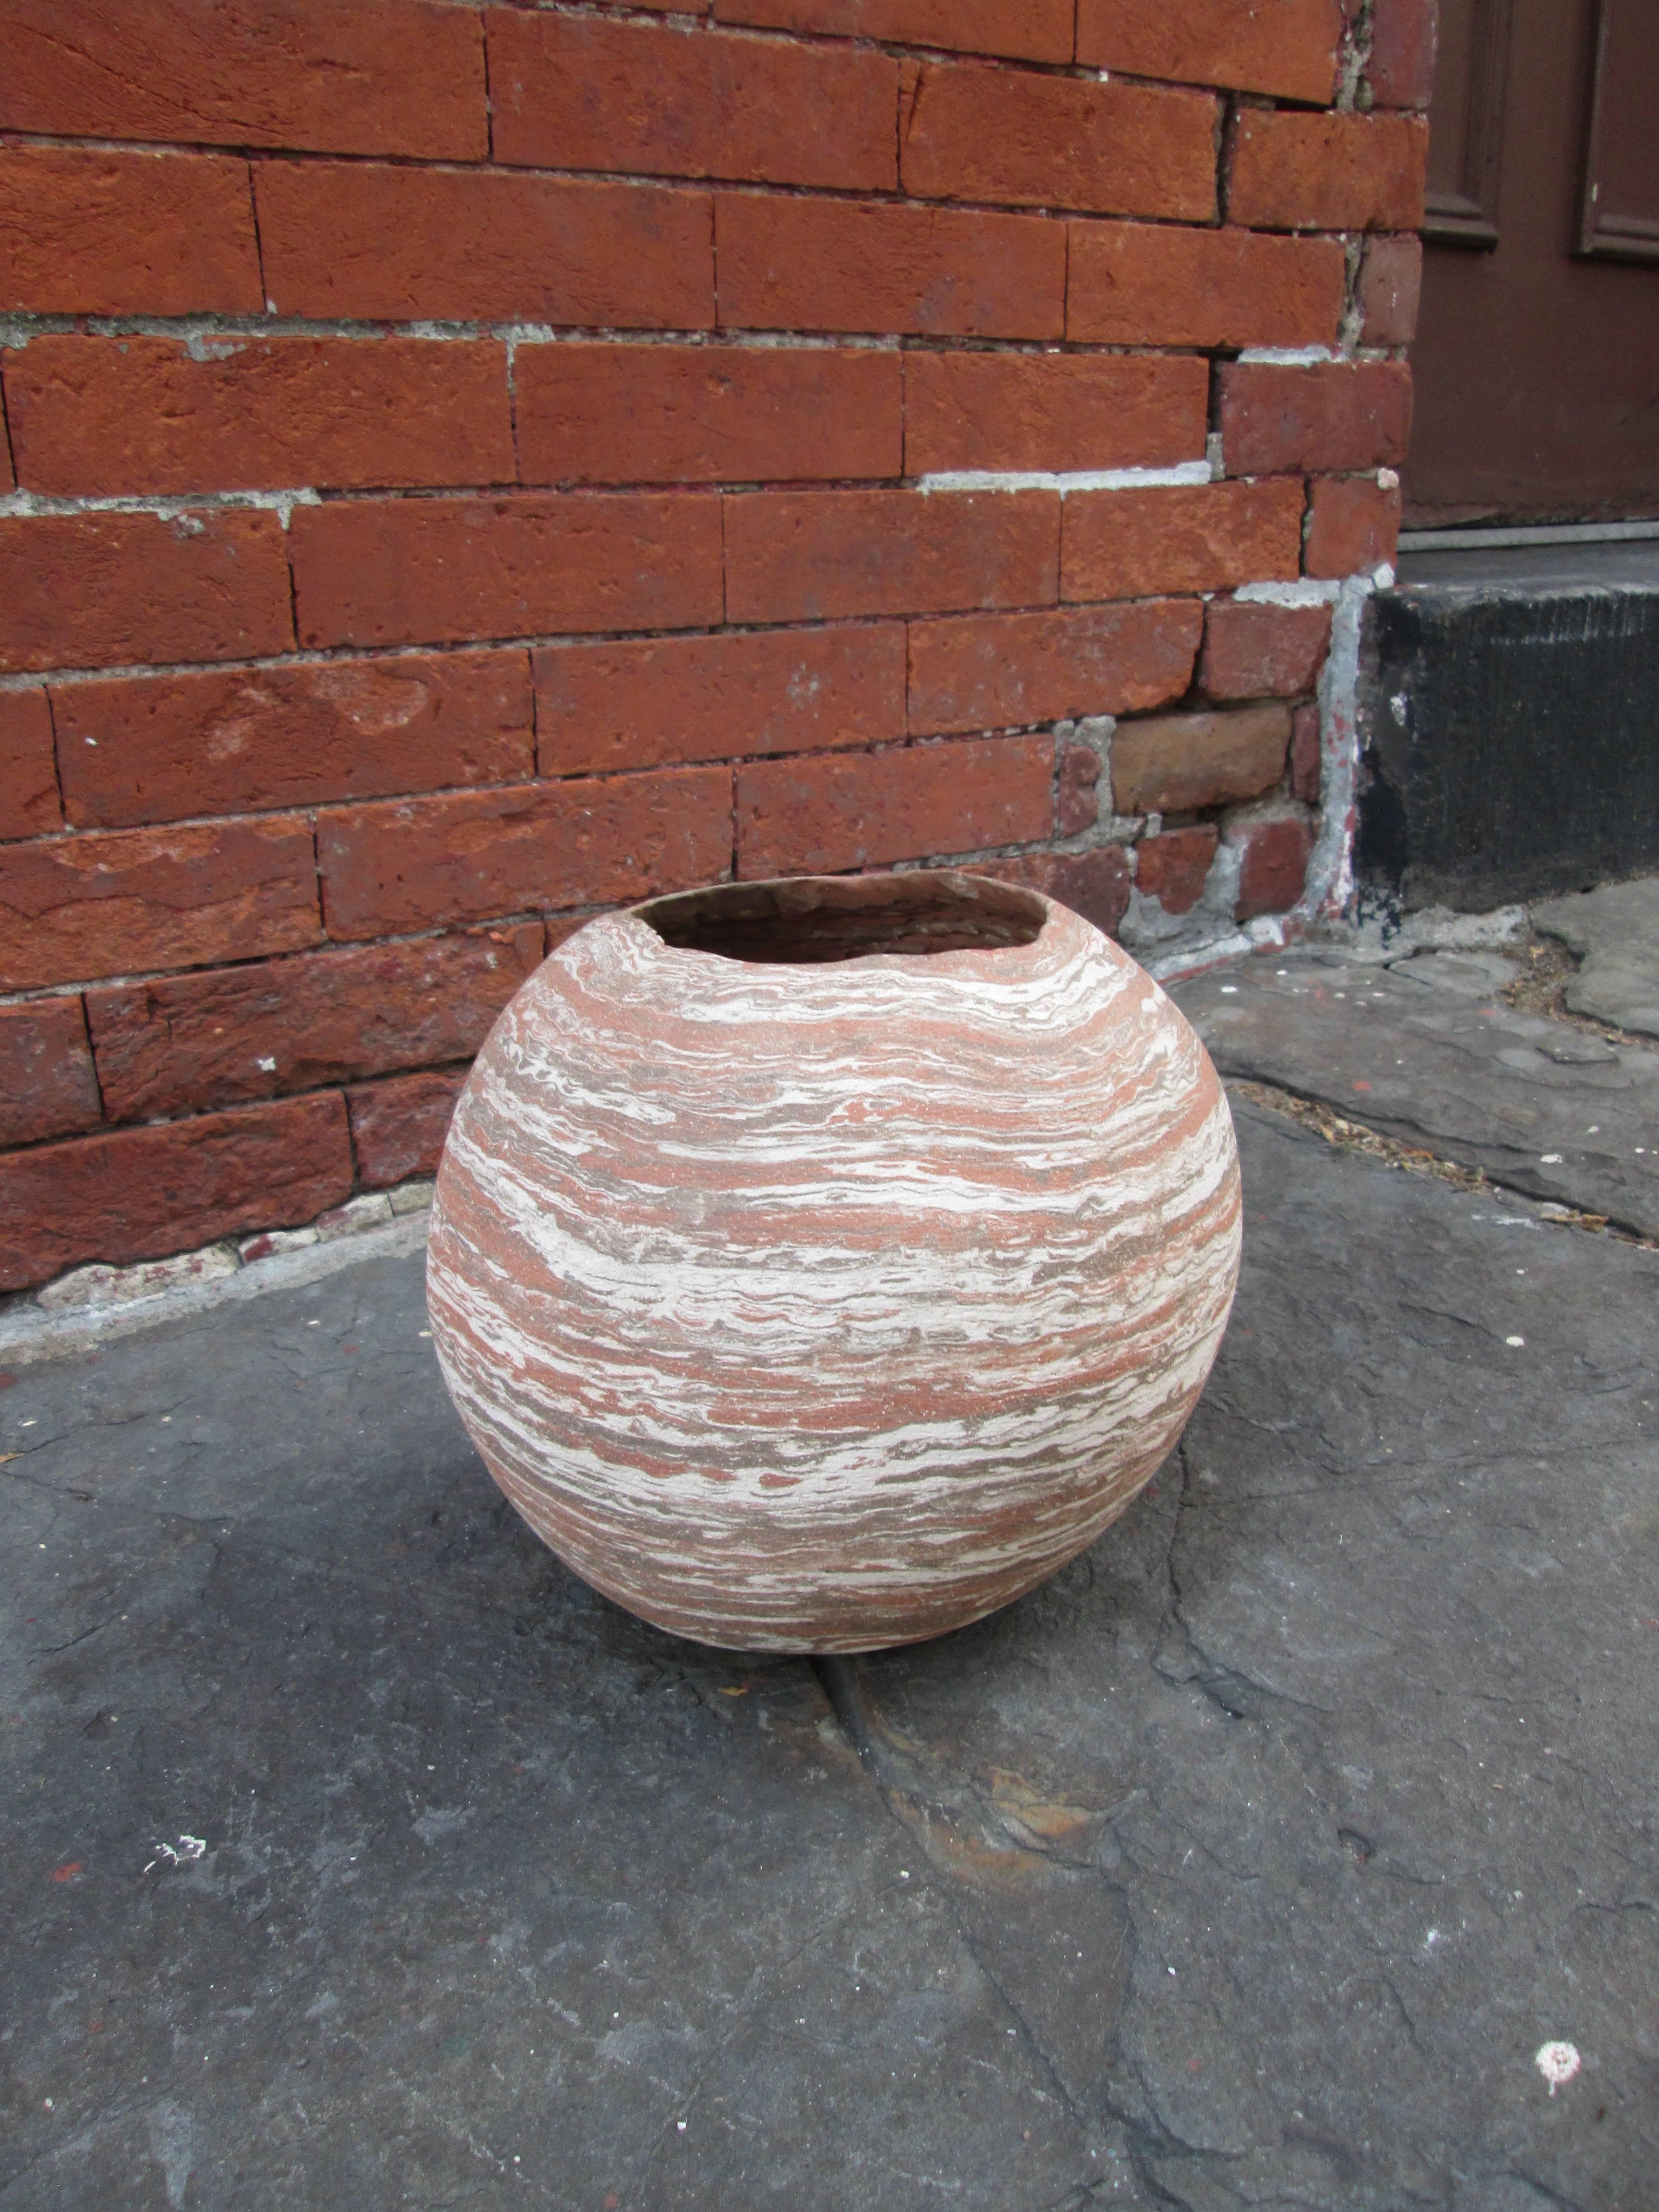 Orb shaped vessel in the manner of American pottery studio Niloak. Signed illegibly on base.